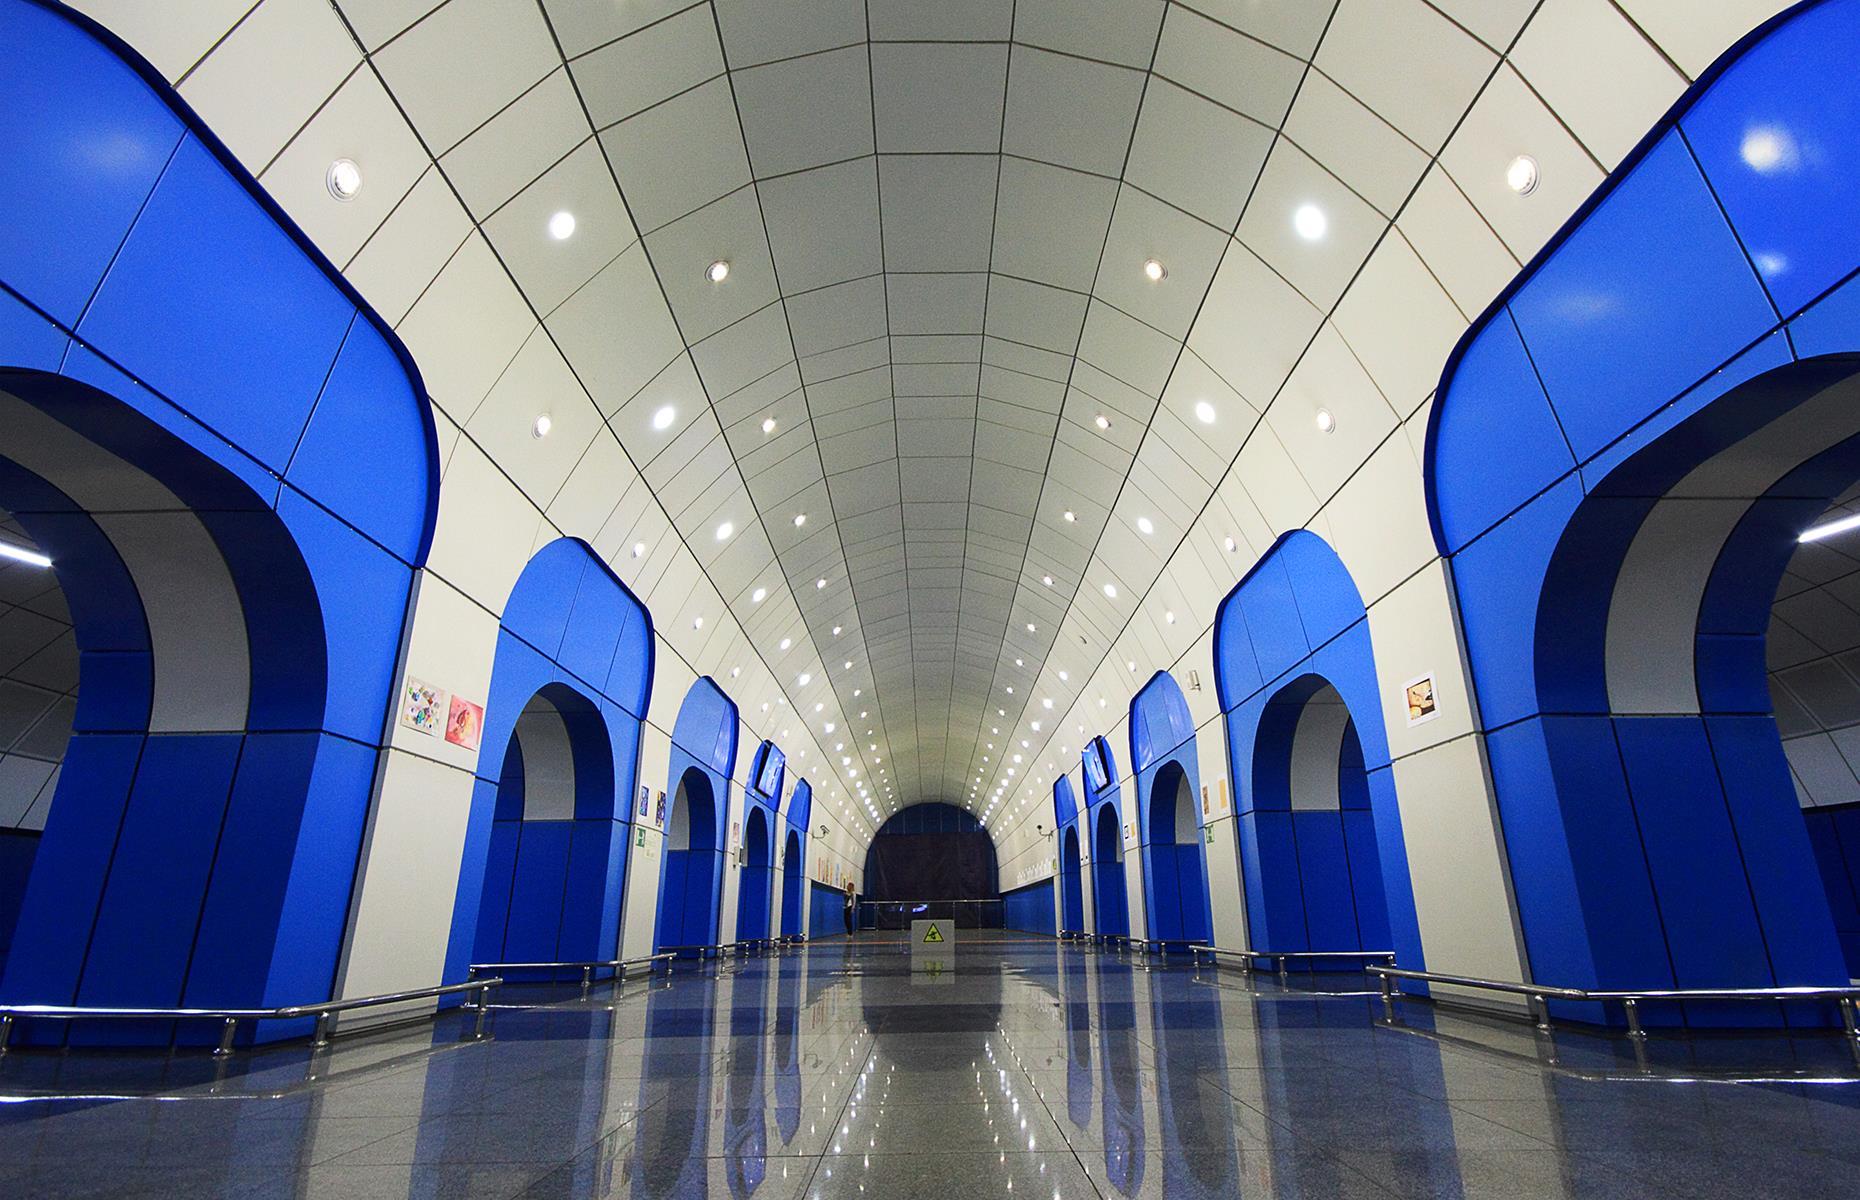 <p>Named after Kazakhstan’s rocket launch facility, this station embodies 1970s sci-fi. Its white and blue tunnels and curved arches are reminiscent of early <em>Star Trek</em> movies, but if that's not enough for your inner geek, a movie of a rocket launch is shown while travelers wait for their train to arrive.</p>  <p><a href="https://www.loveexploring.com/gallerylist/81623/incredible-abandoned-subway-stations-from-around-the-world"><strong>Take a look at incredible abandoned subway stations from around the world</strong></a></p>